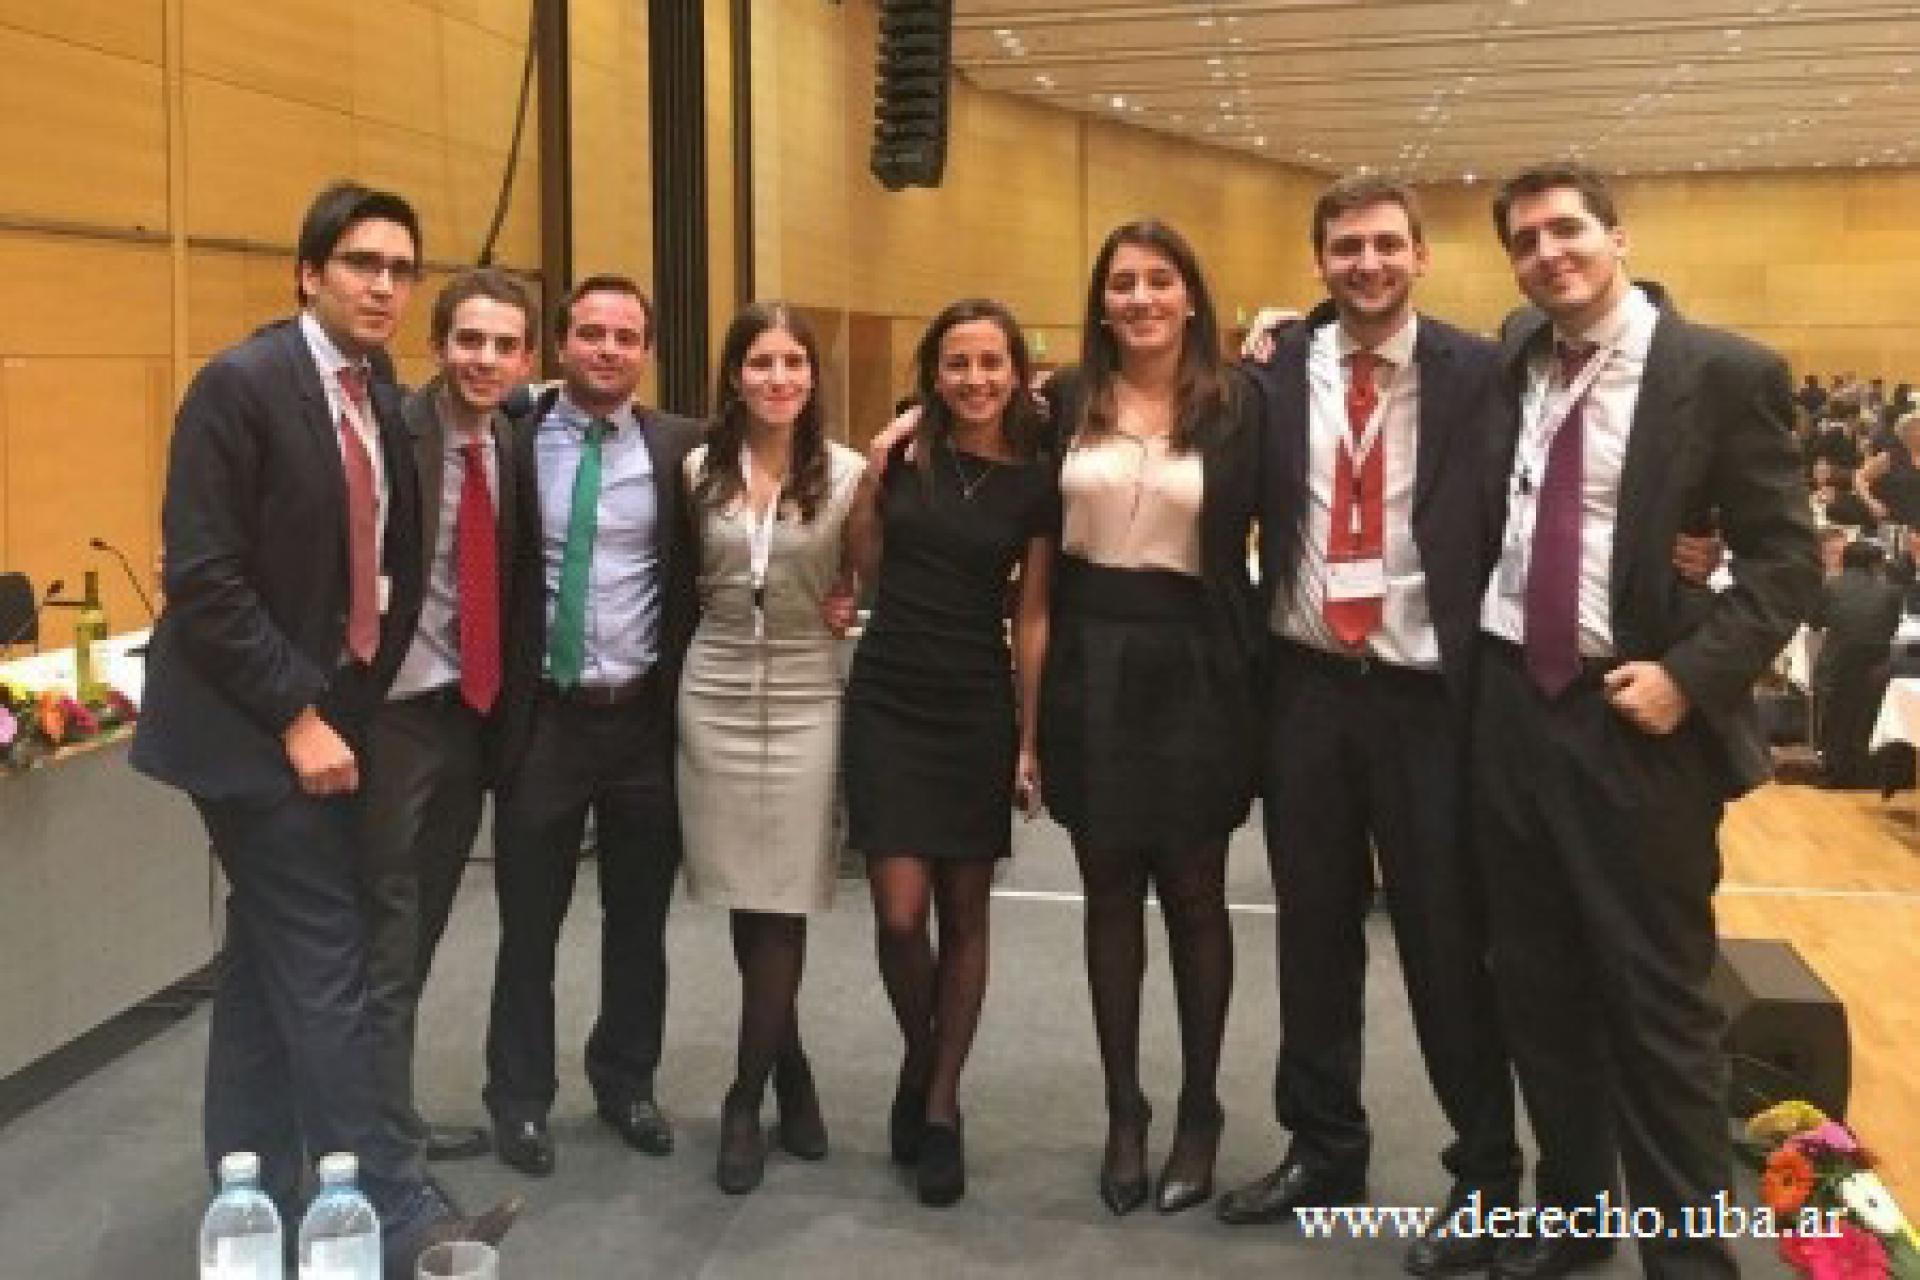 UBA team for the 23rd Willem C. Vis moot 2016 and their coaches in Vienna.